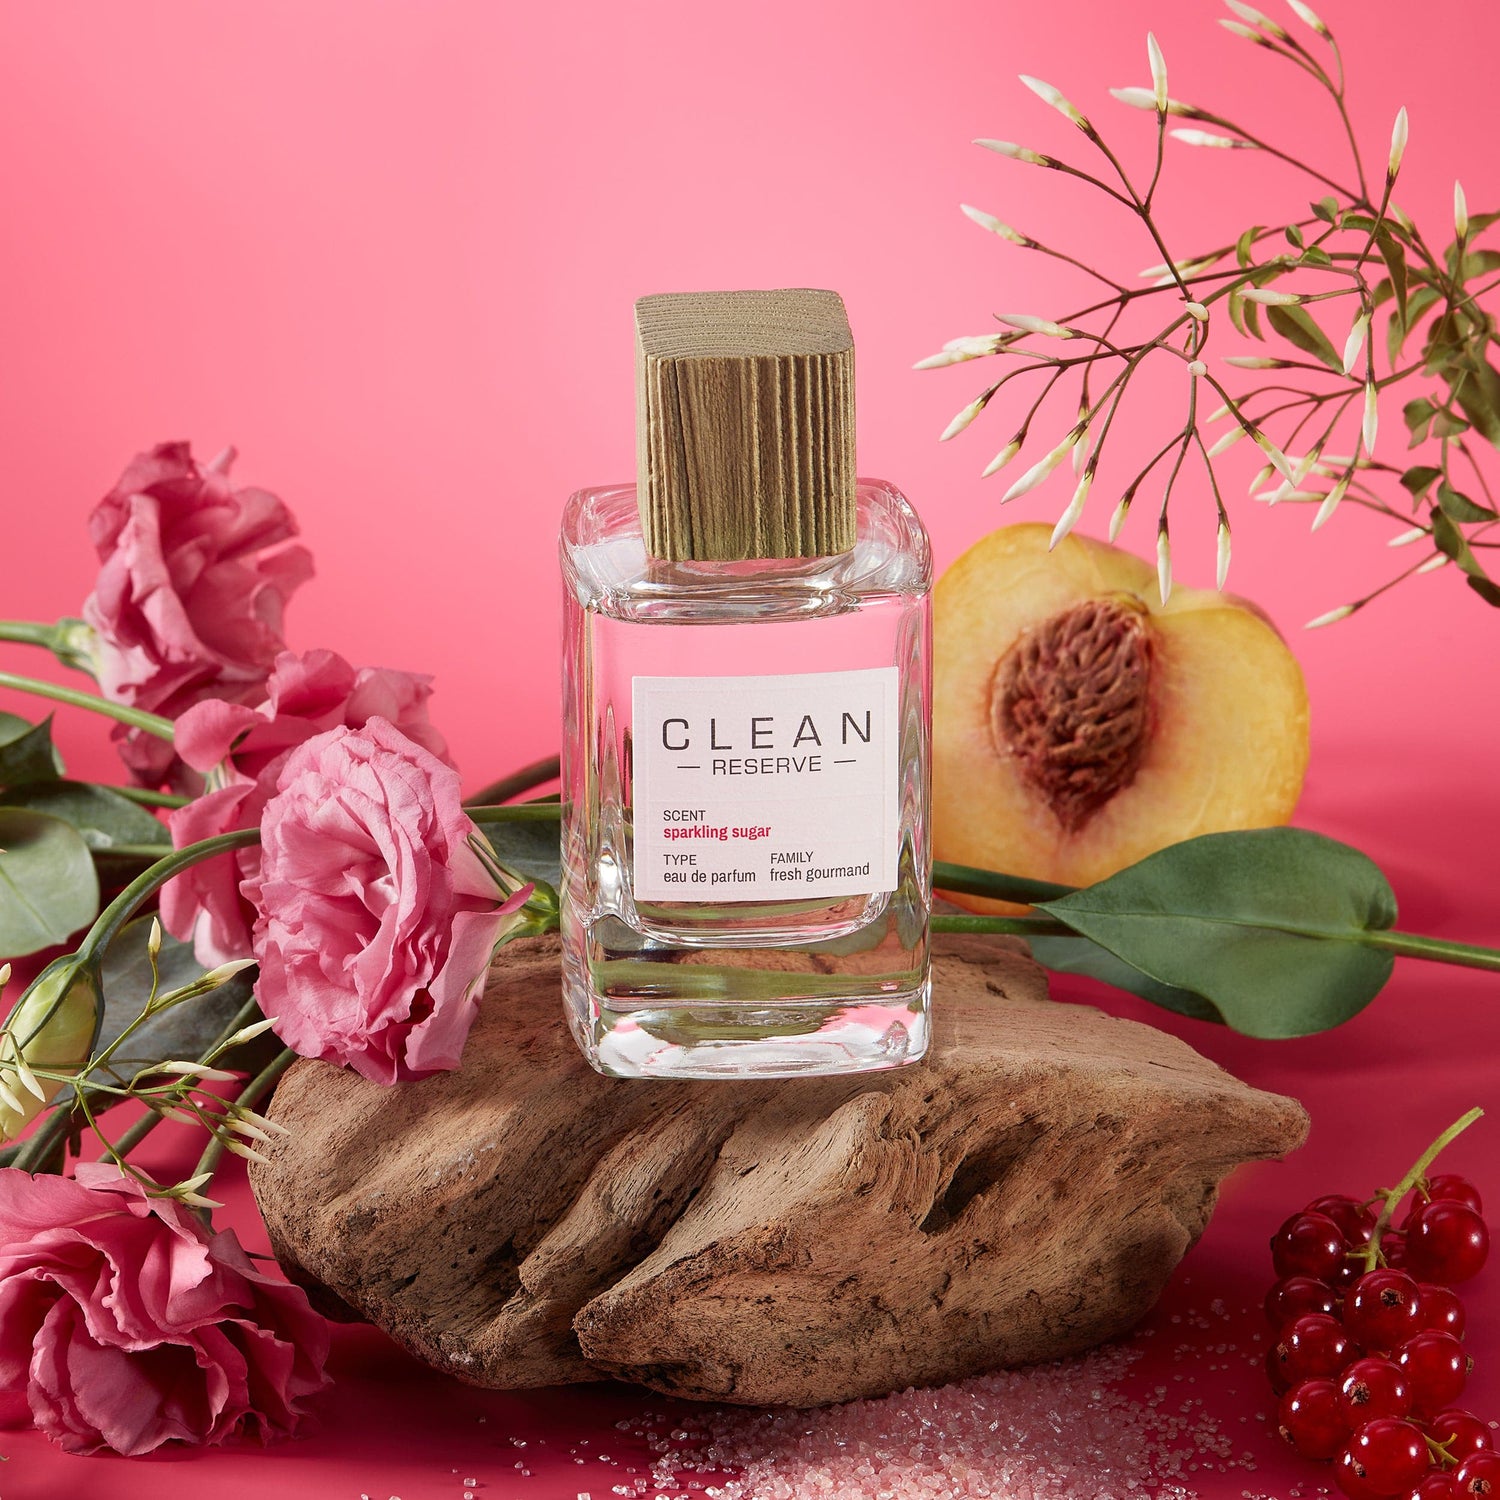 Gingered Peach Fragrance (Natural-Based, Phthalate-Free)